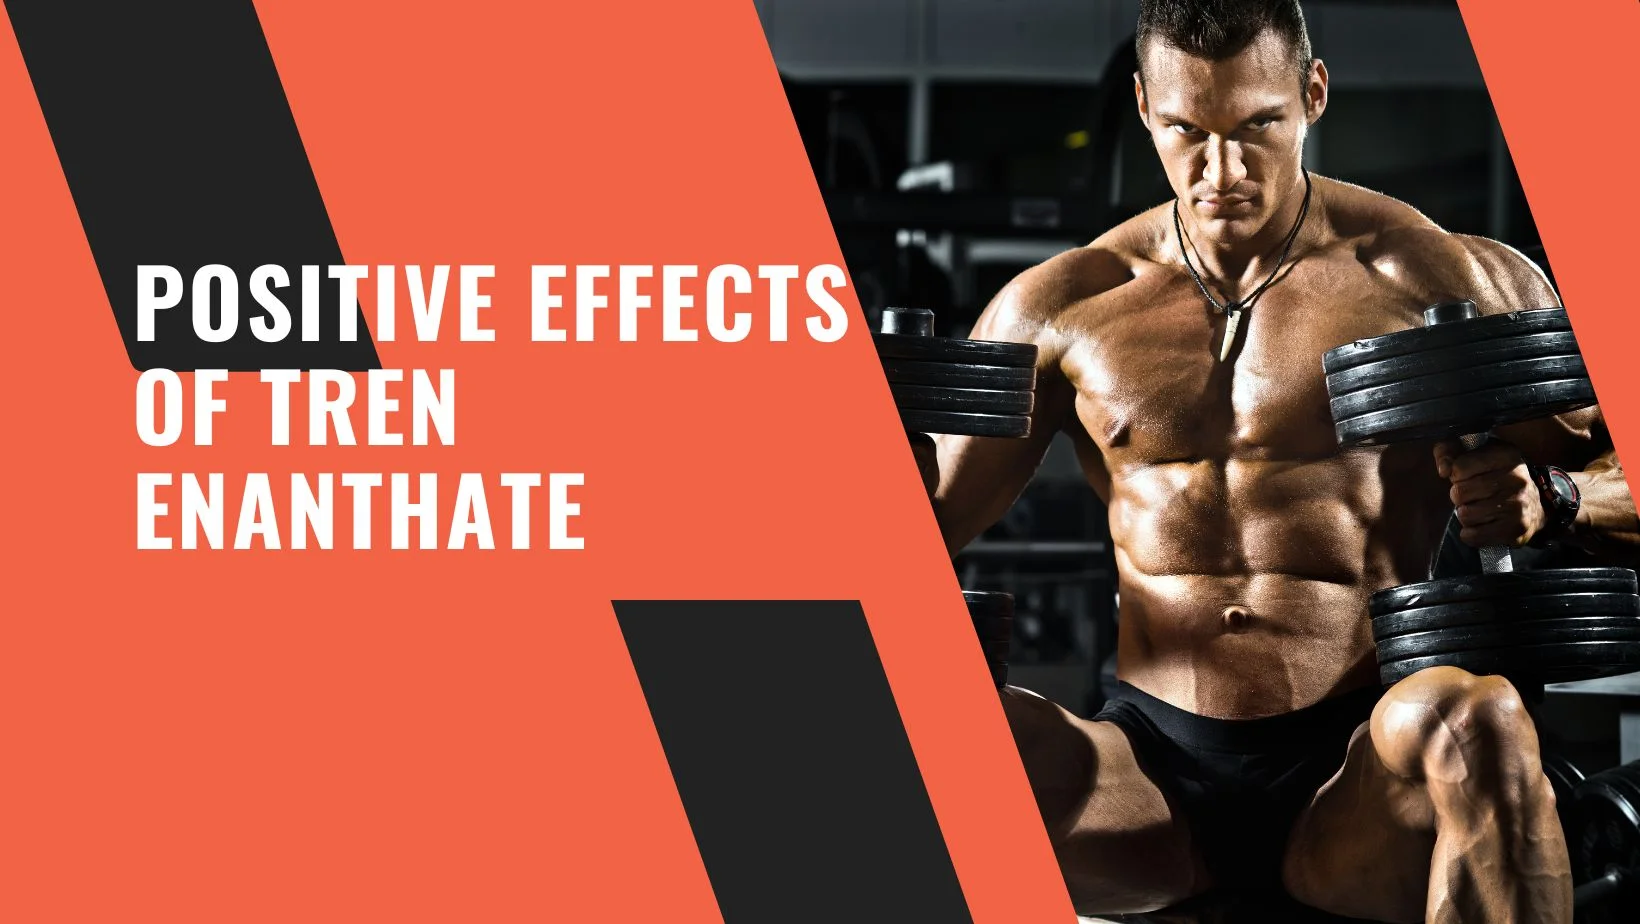 Positive Effects of Tren Enanthate